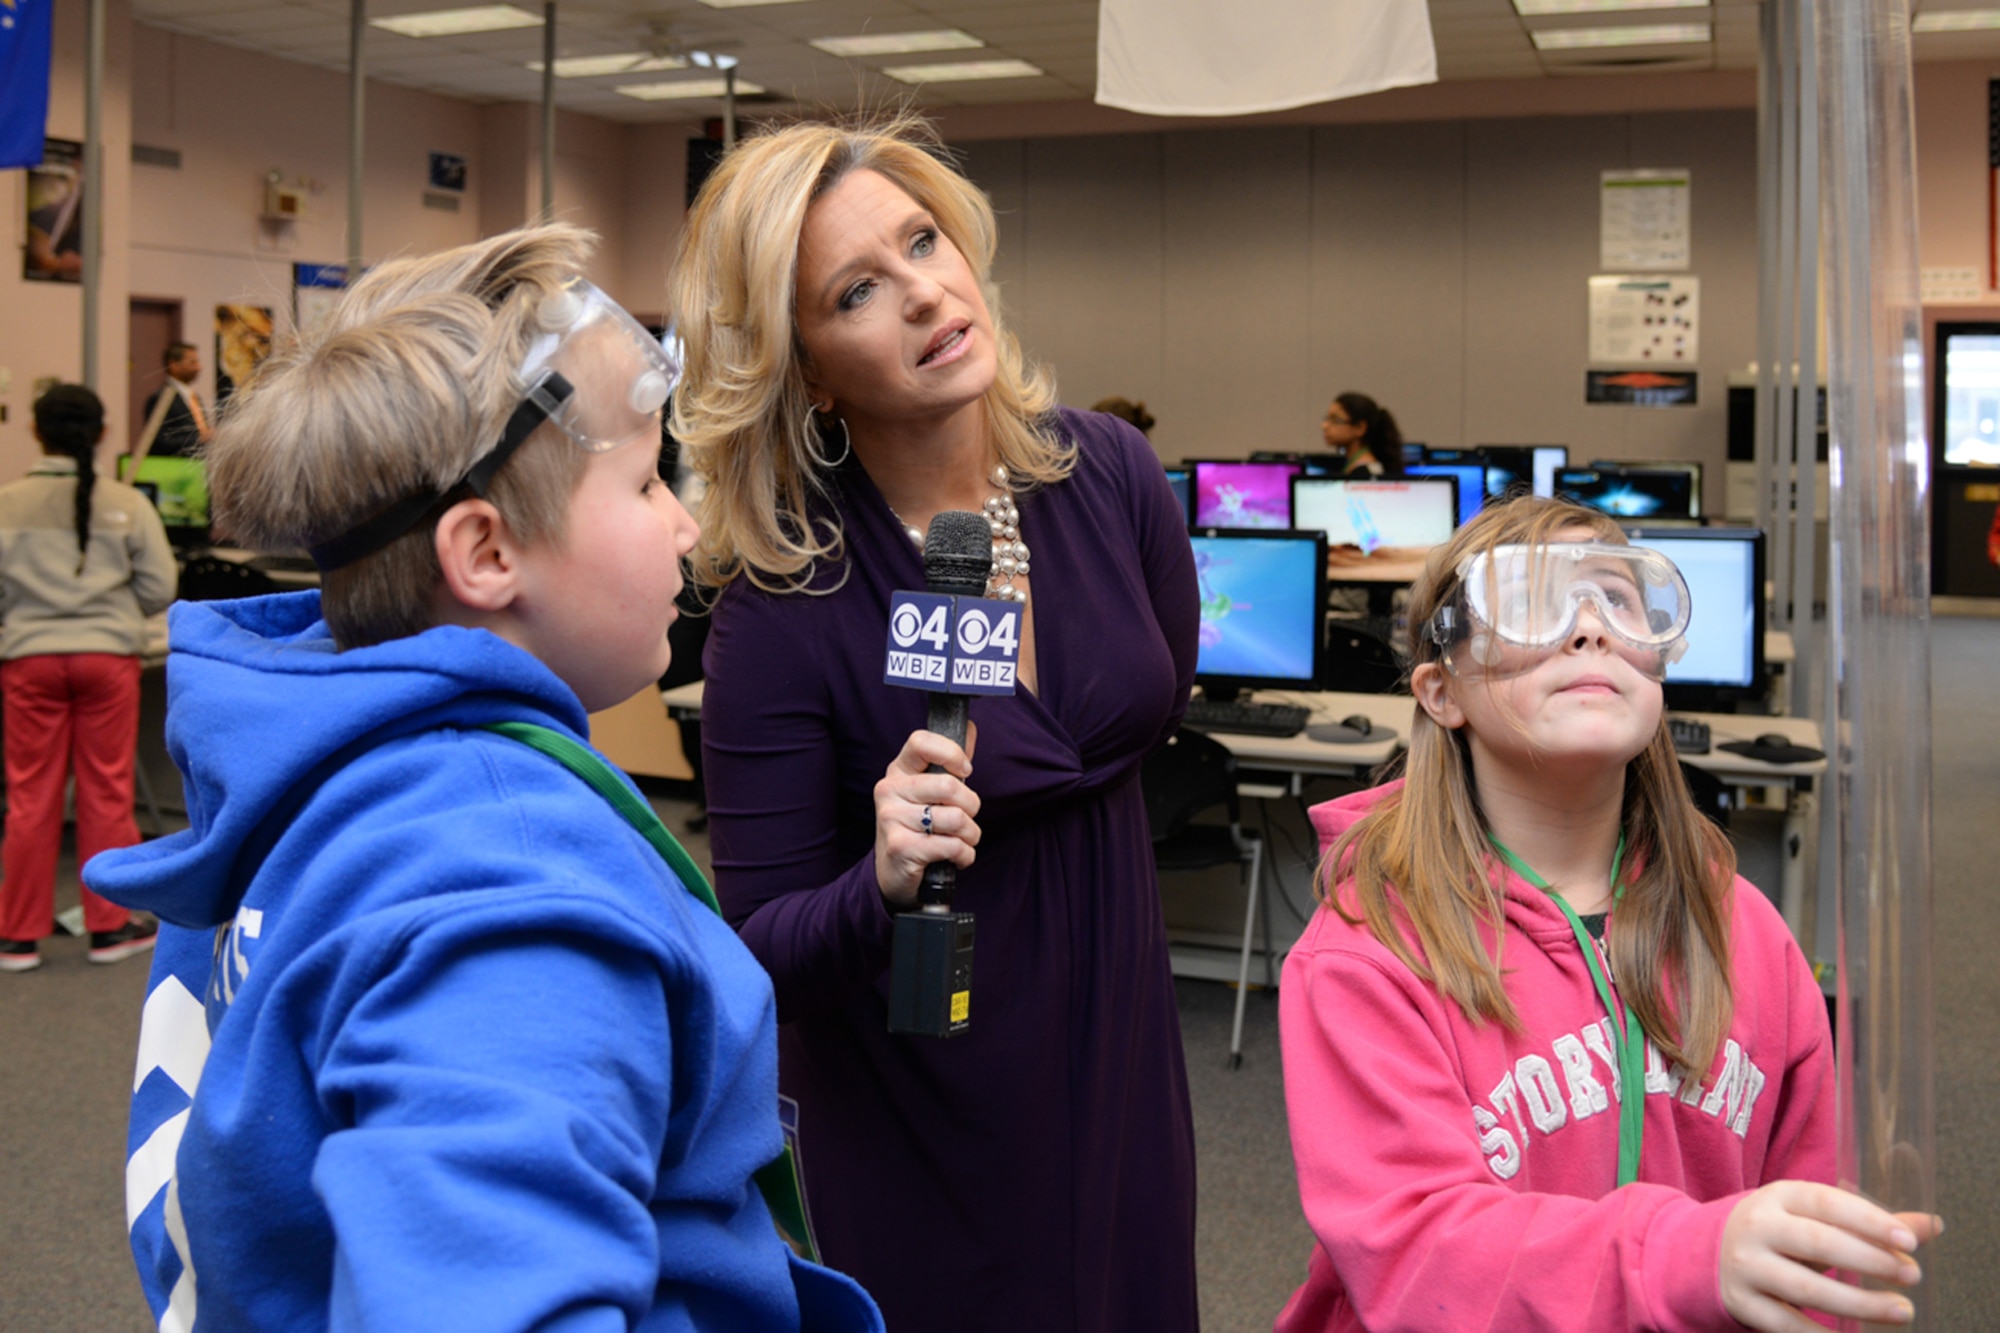 Reporter Paula Ebben, news anchor for Boston's WBZ-TV, speaks to Caleb Roberts, 10, and Lauri Young, 11, about a rocket experiment at Hanscom Air Force Base's STARBASE Academy, March 20. Both Young and Roberts are fifth grade students from Leominster, Mass., who are learning about science technology, engineering and mathematics areas at STARBASE.